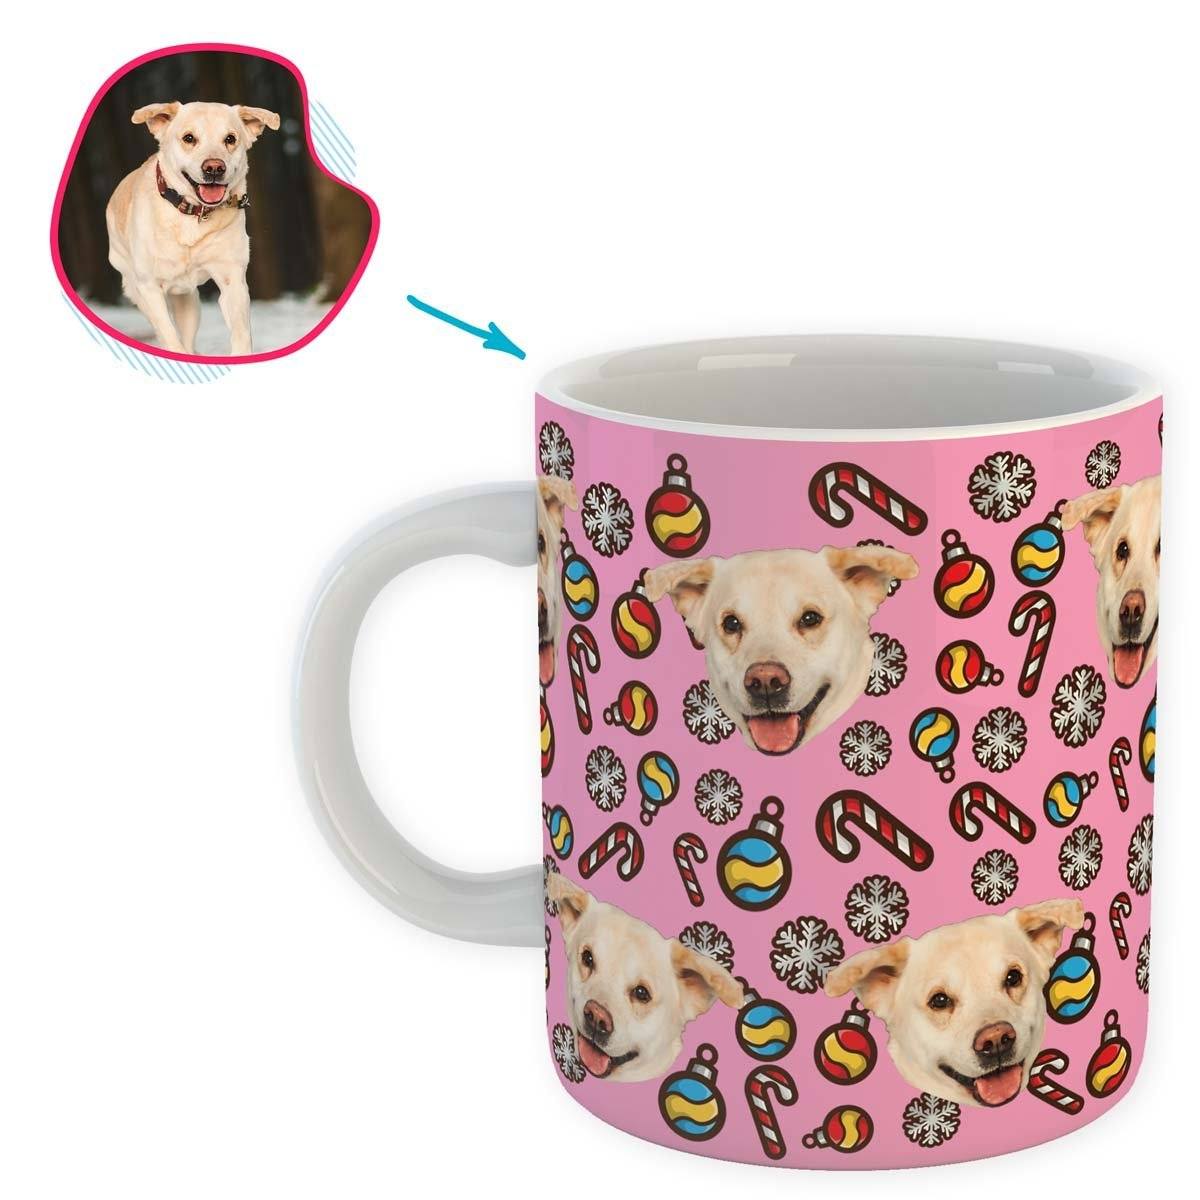 pink Christmas Tree Toy mug personalized with photo of face printed on it